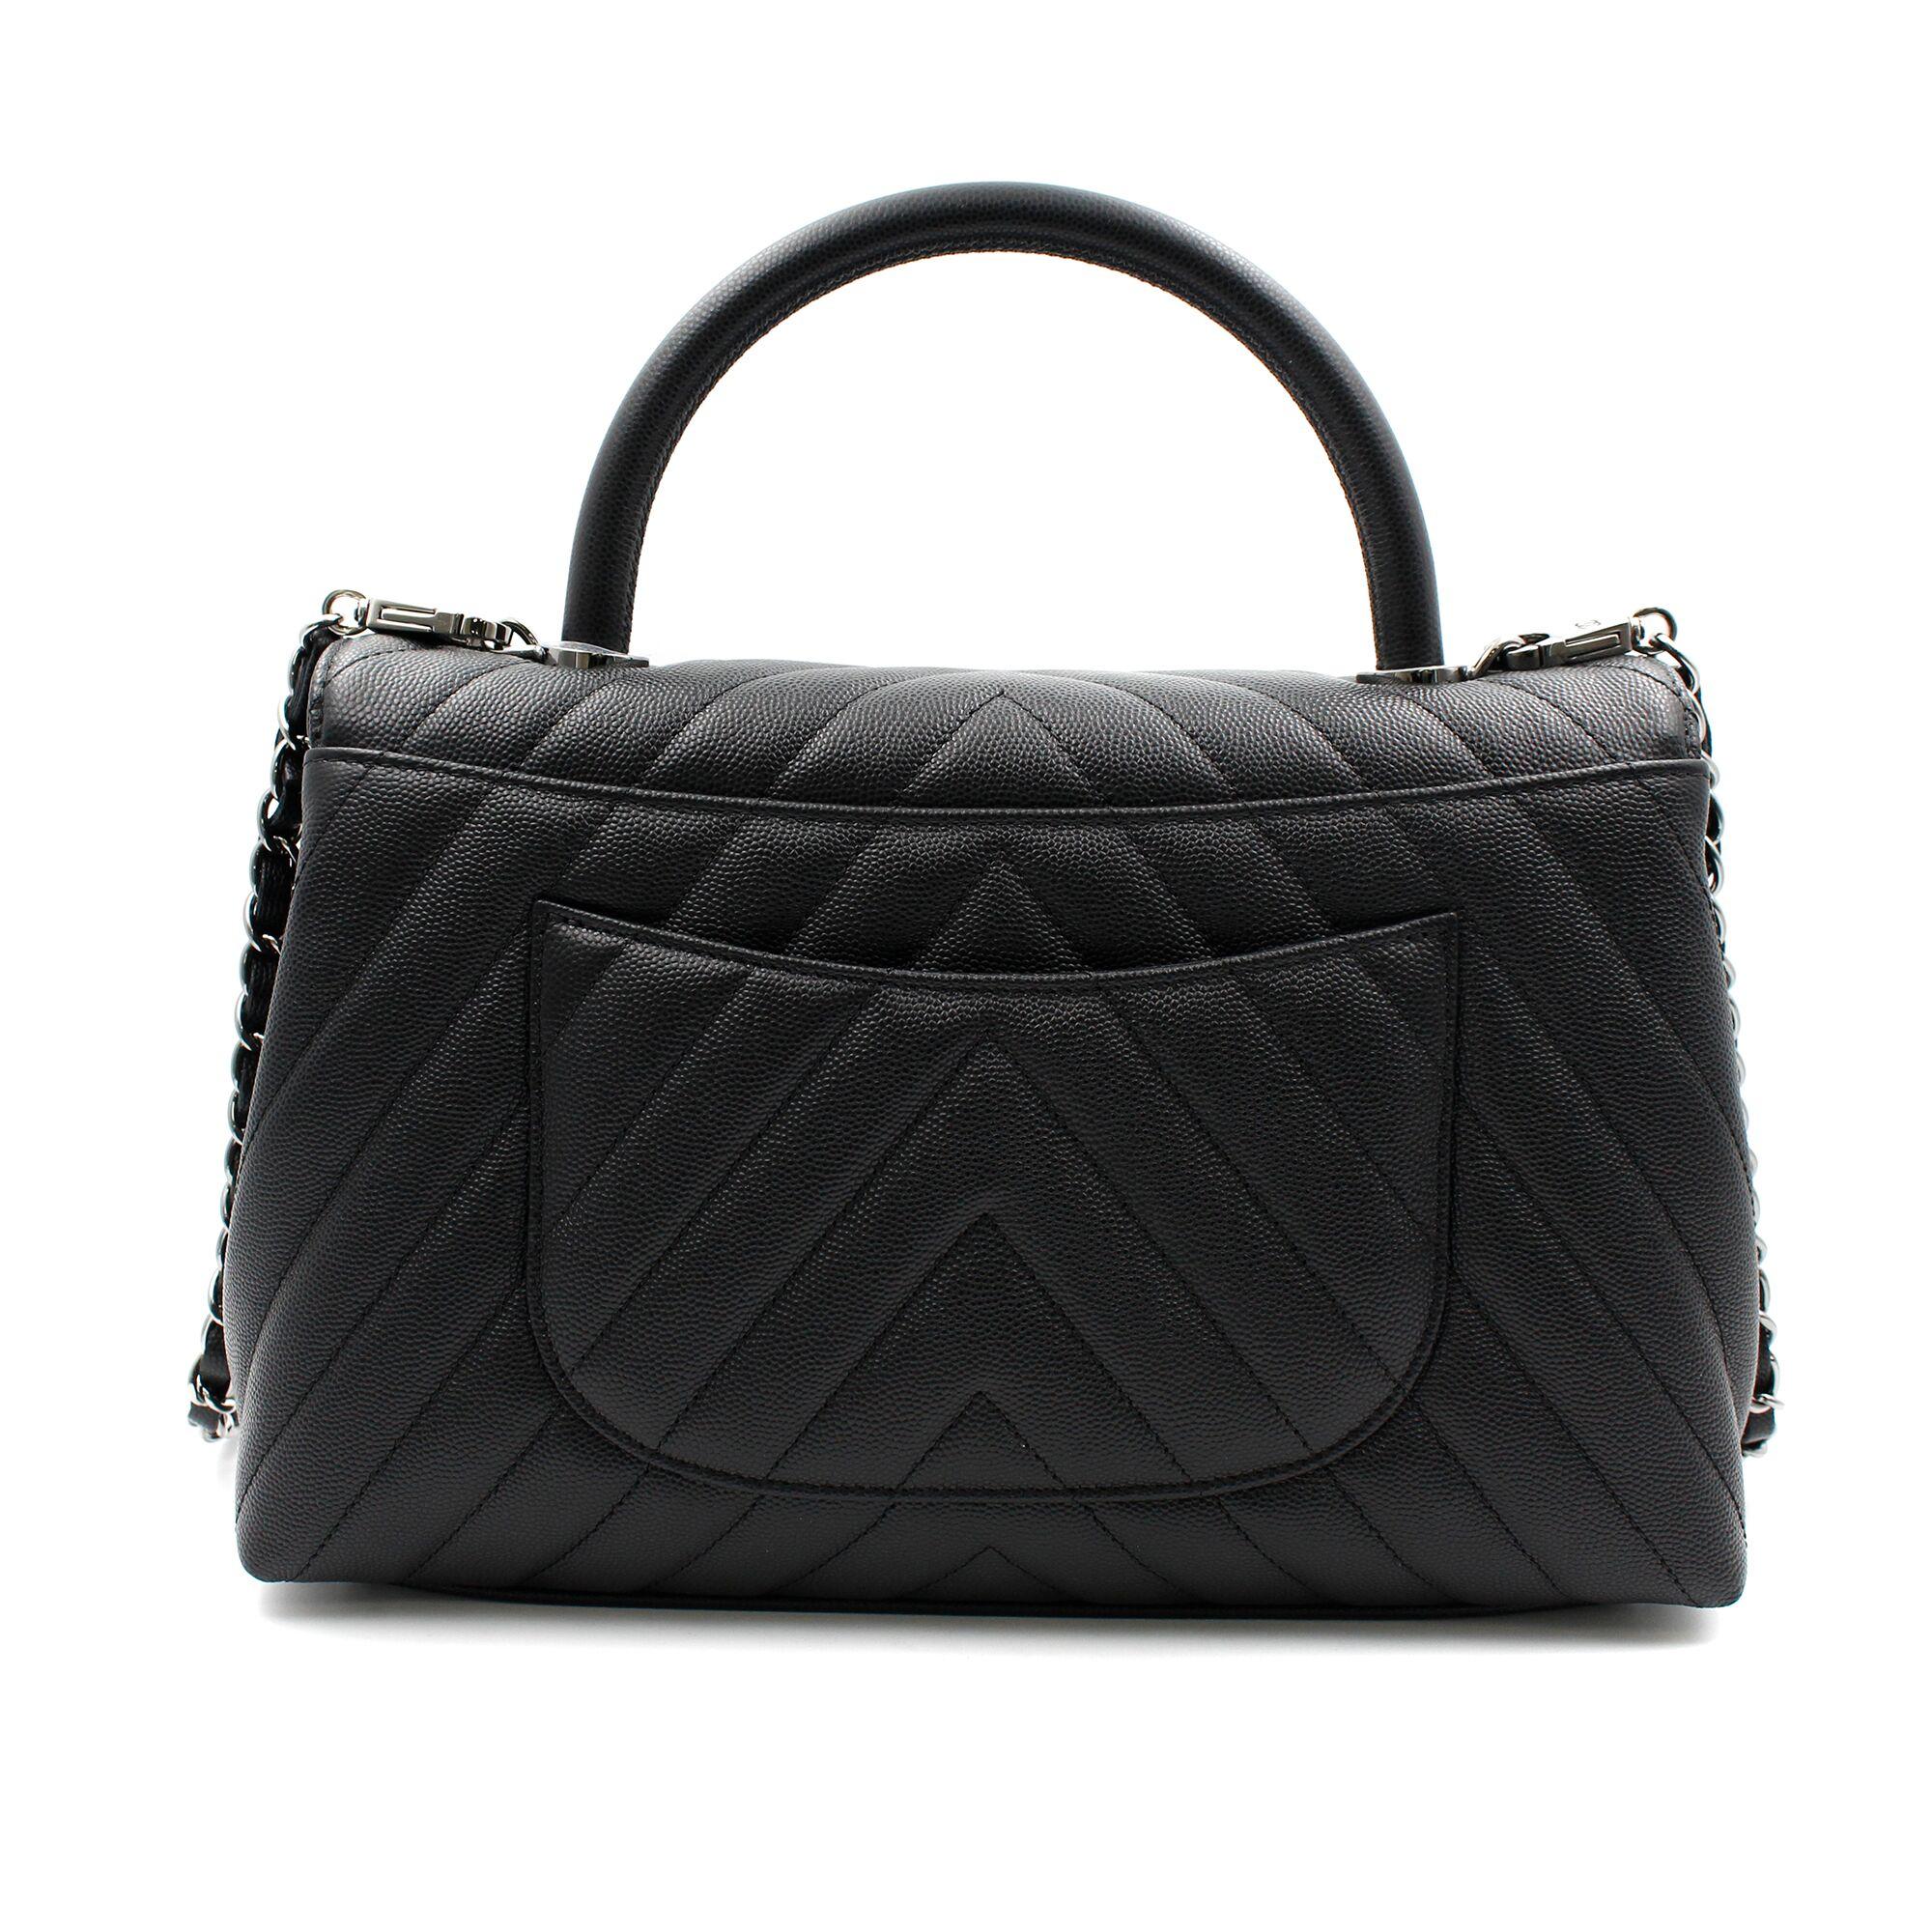 New Chanel Chevron Medium Flap Bag in black shiny calfskin with ruthenium-finish hardware. This bag features a top handle, a front flap with signature CC turn-lock closure with a half moon back pocket and an adjustable interwoven ruthenium-finish